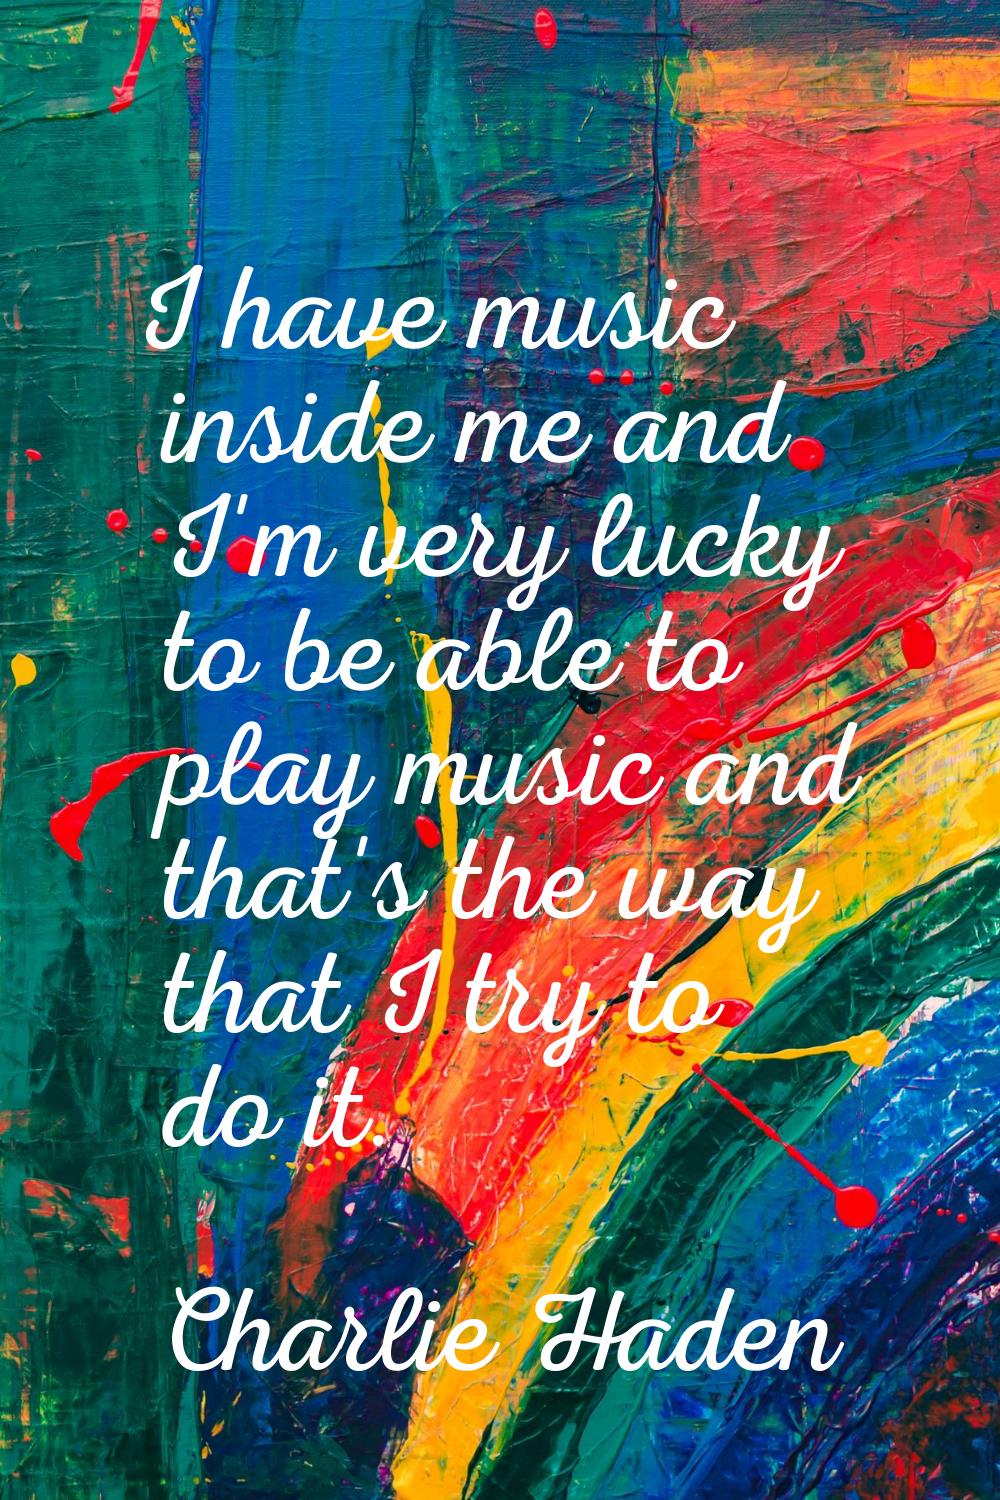 I have music inside me and I'm very lucky to be able to play music and that's the way that I try to